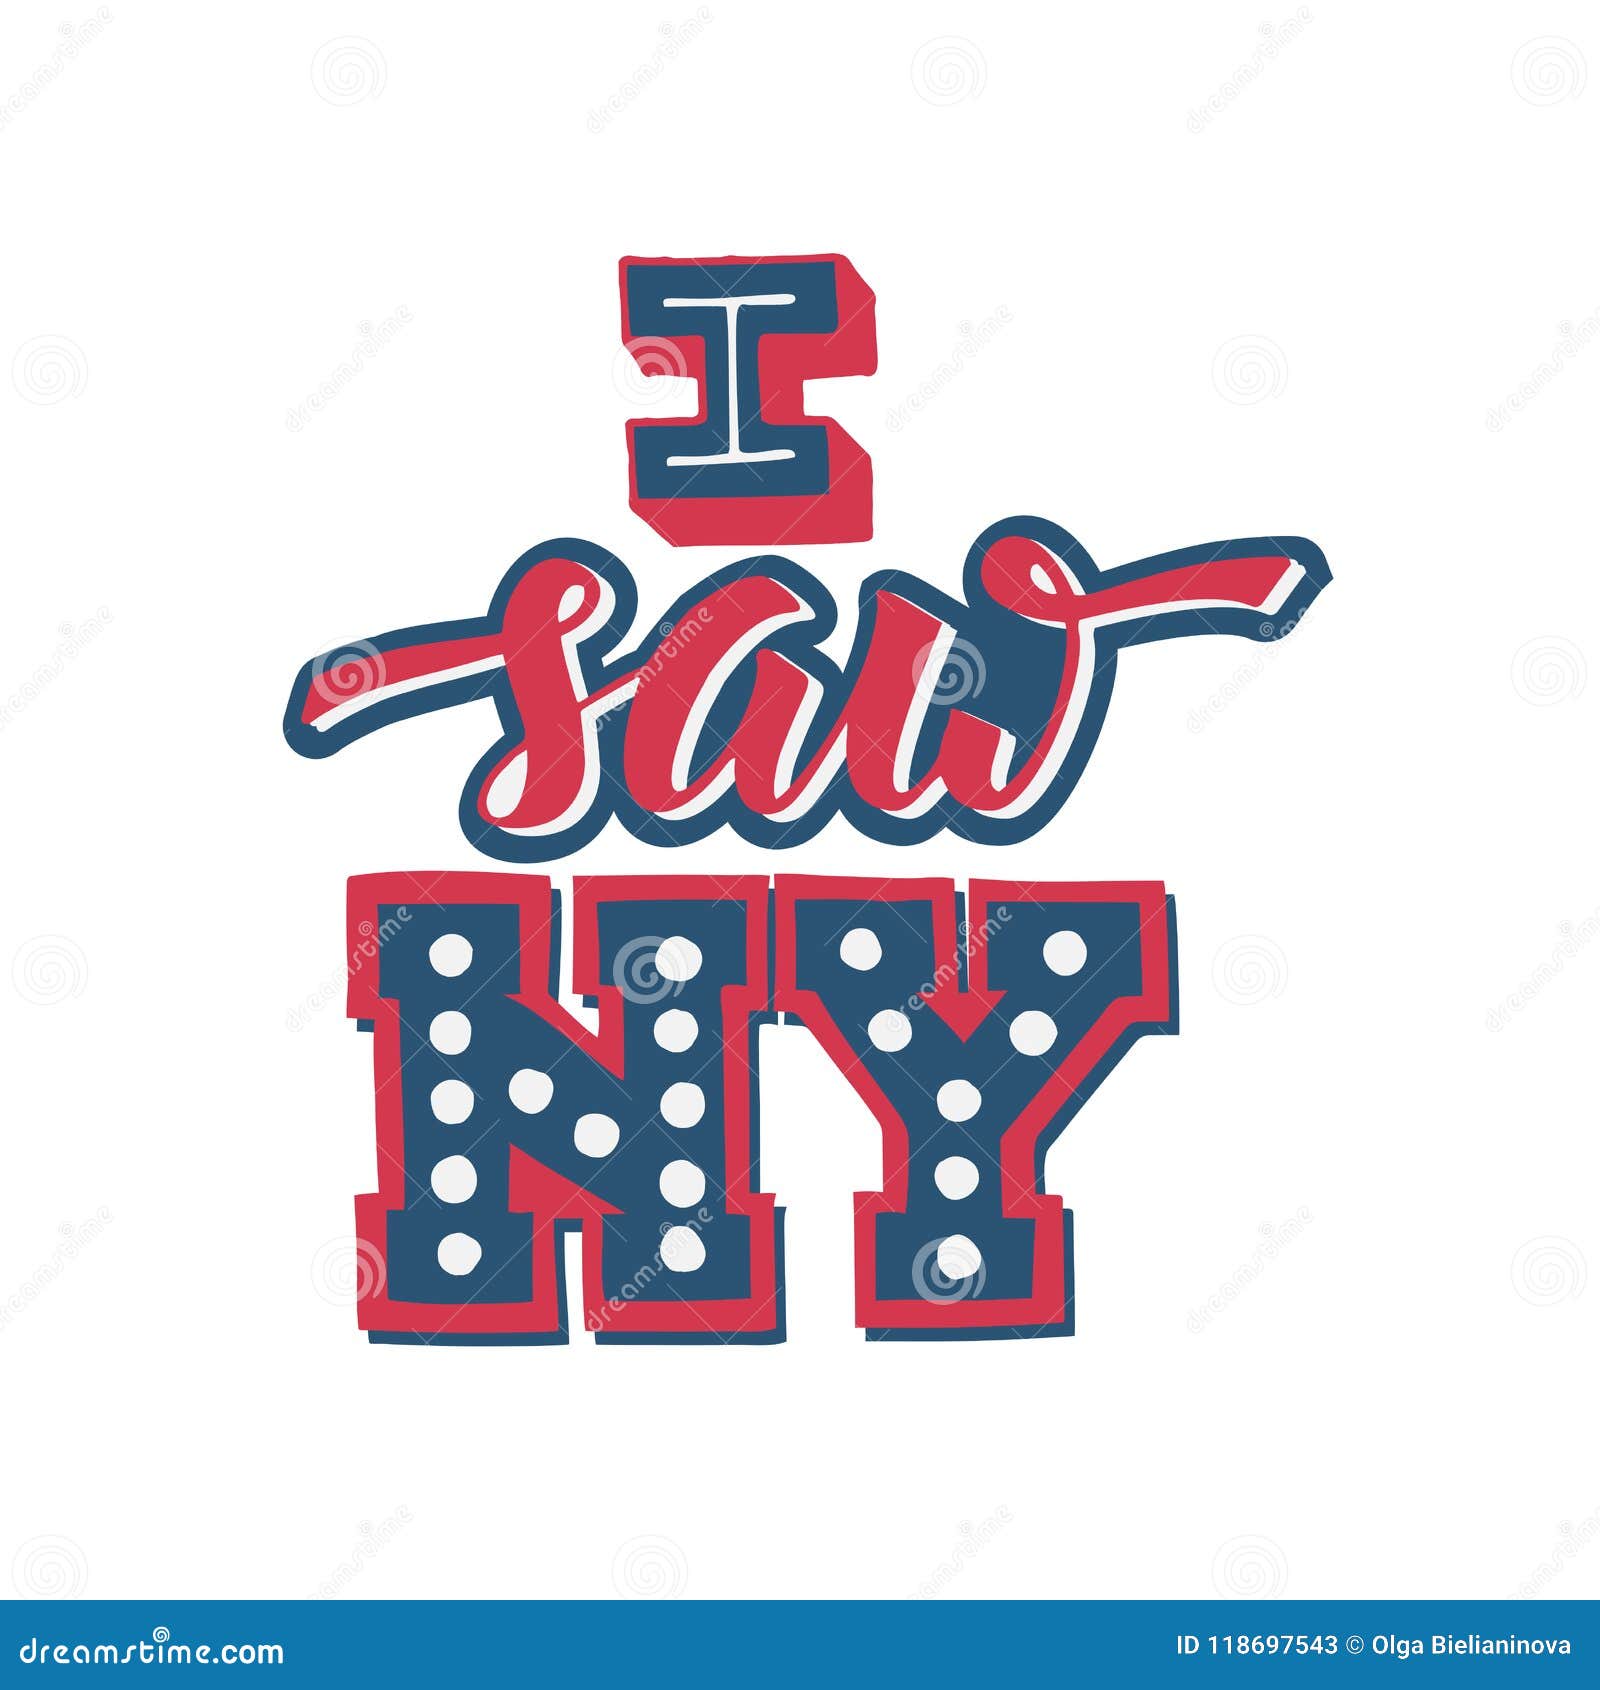 Download I Saw New York. I Love NY. Hand Lettering Design For T ...